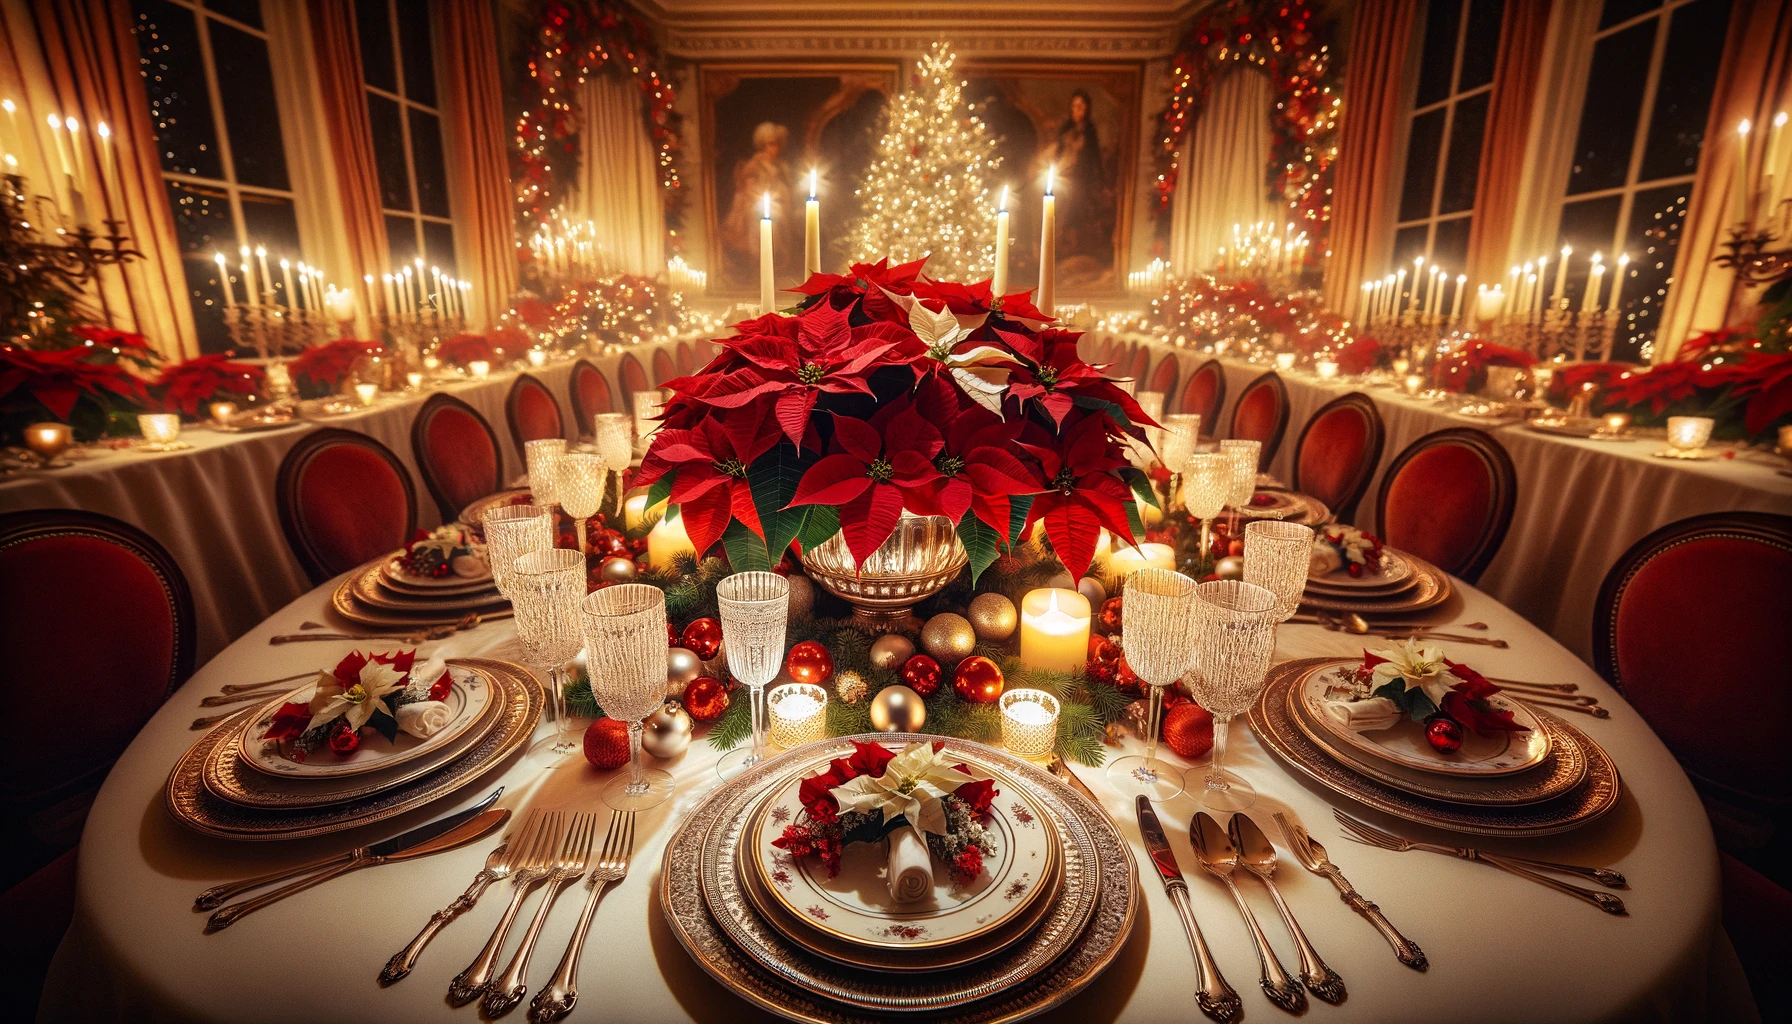 Elegant Christmas dinner table setting with festive decorations.